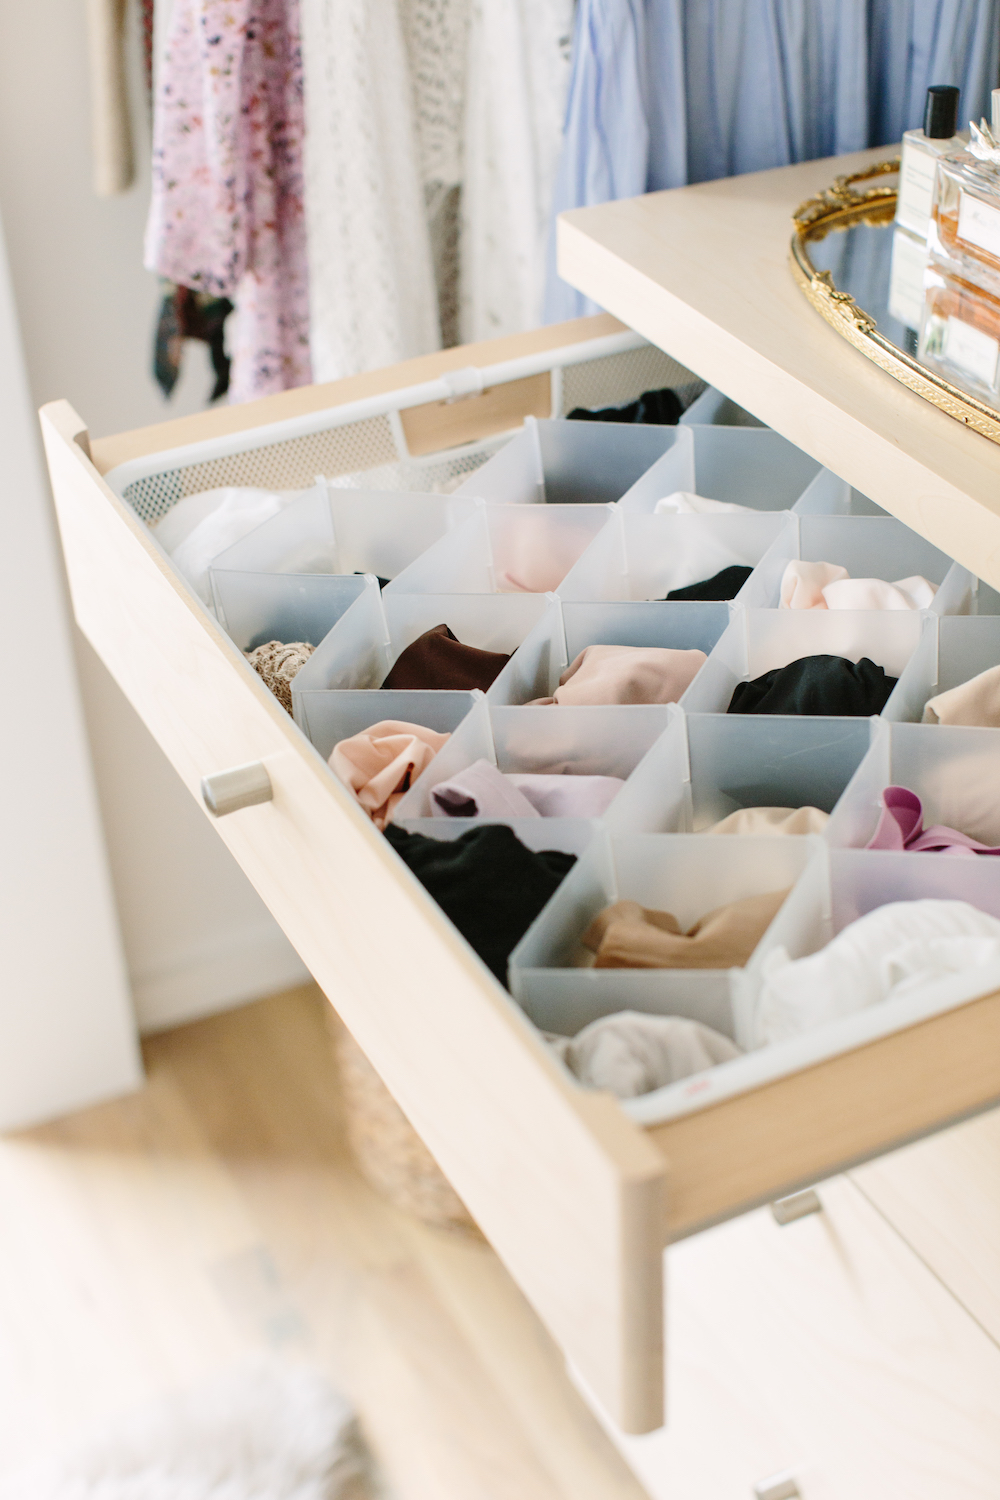 Lingerie Tips: Storage Ideas for your Lingerie and Stockings